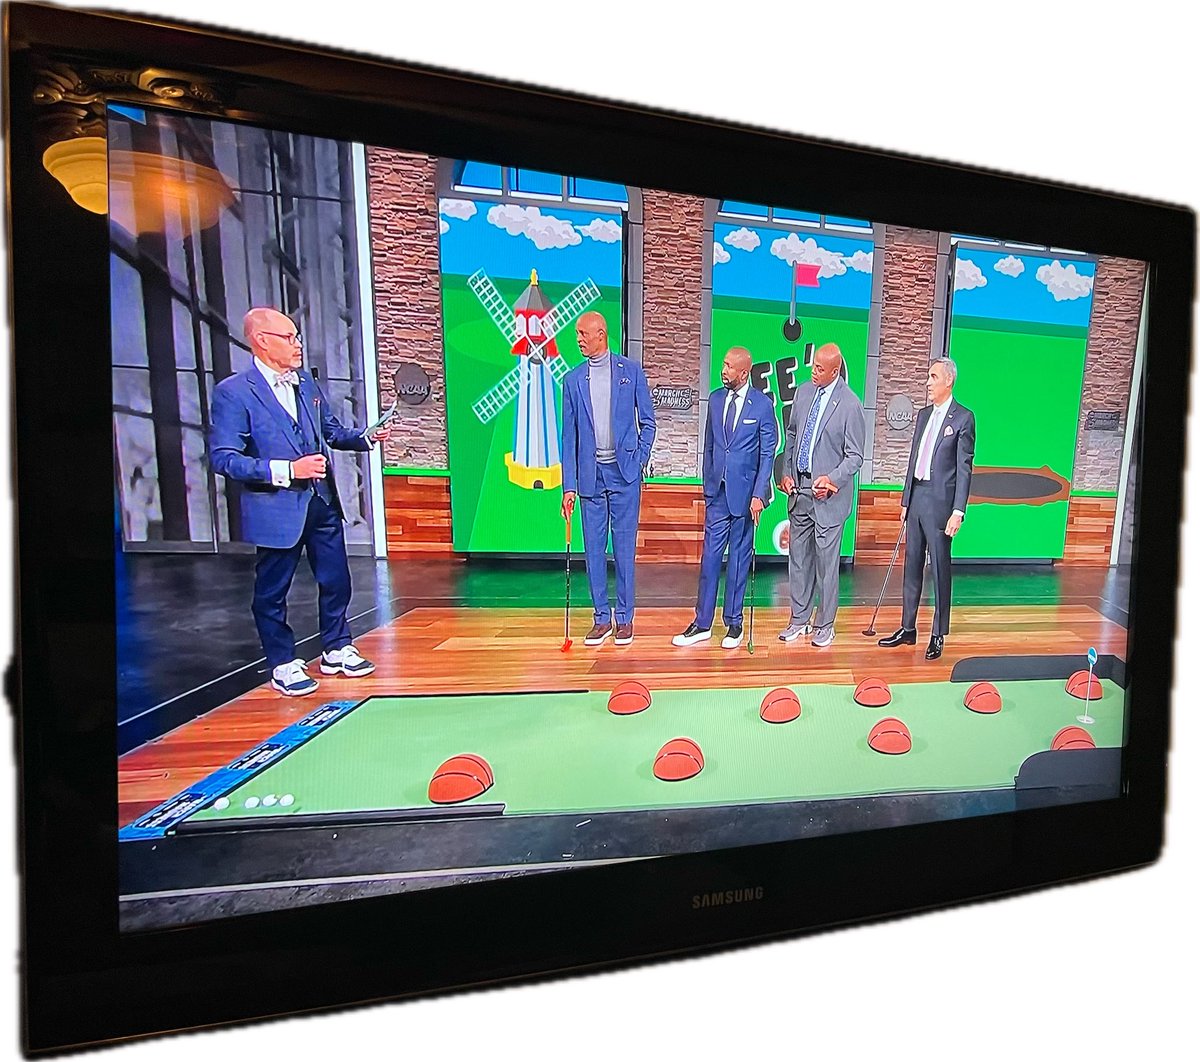 BirdieBall putting green on TBS, March Madness broadcast!